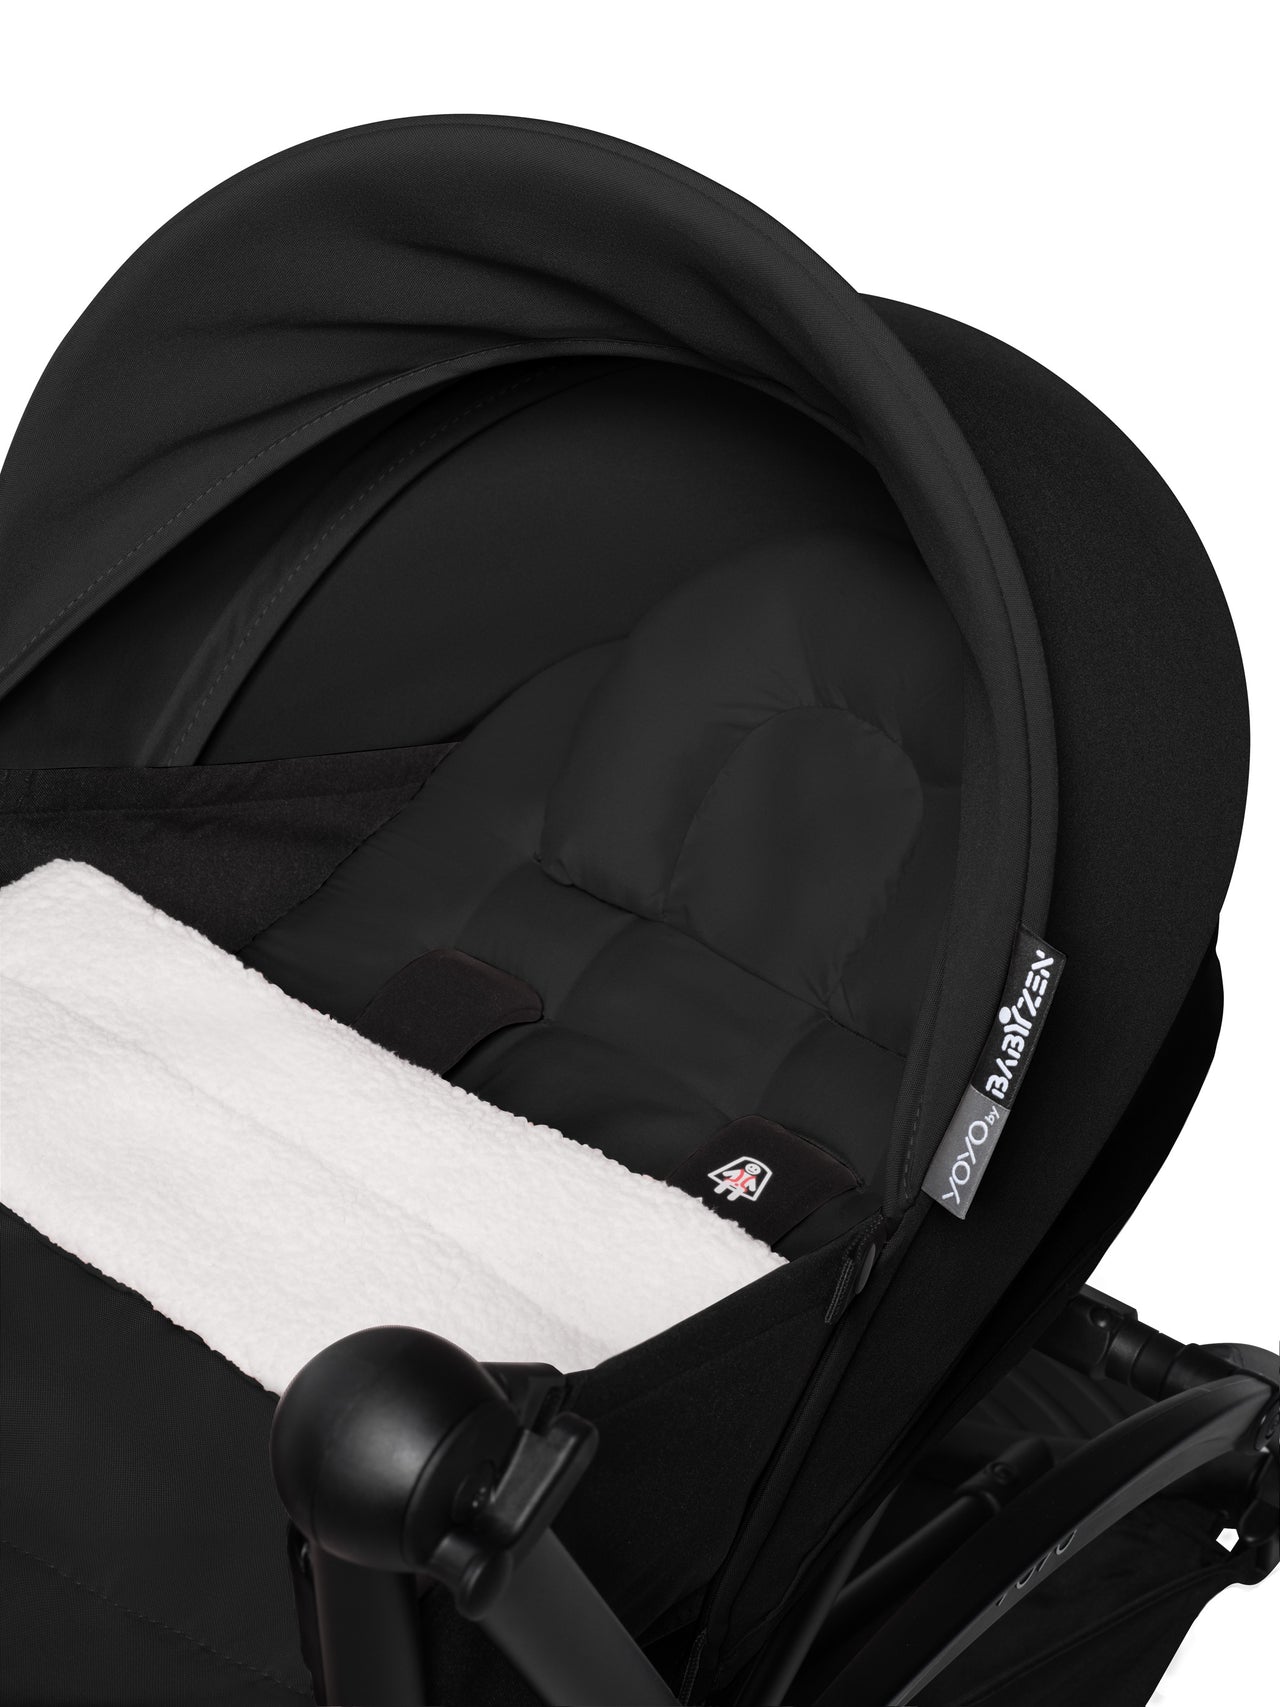 BABYZEN YOYO² (White Frame) Complete with Newborn pack  - Black with FREE BACKPACK